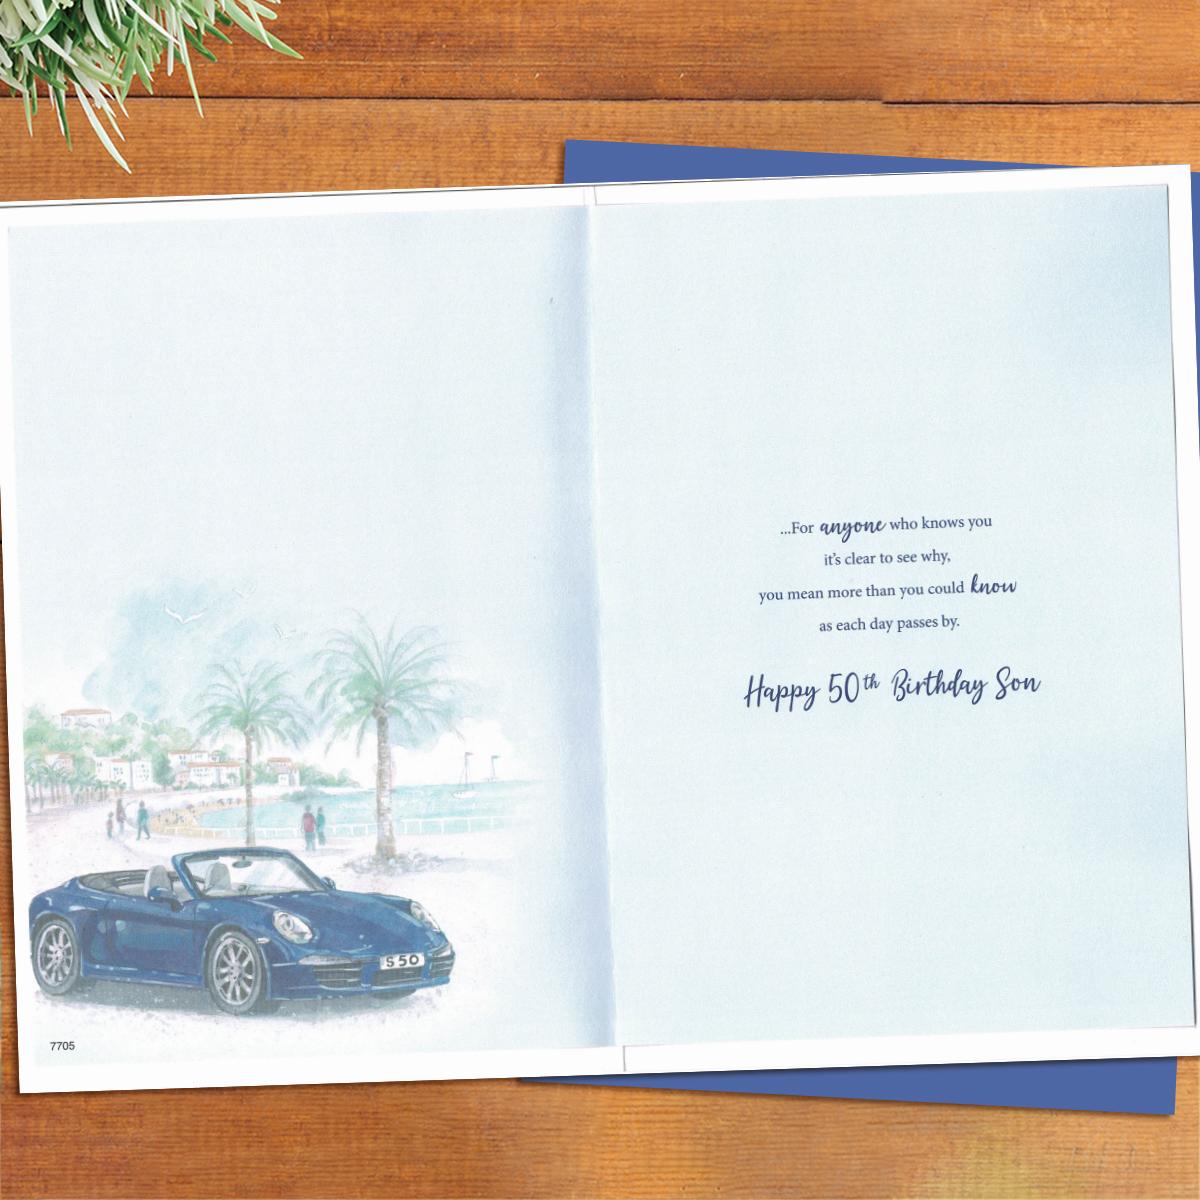 Inside Of Age 50 Birthday Card Showing Layout And Printed Text